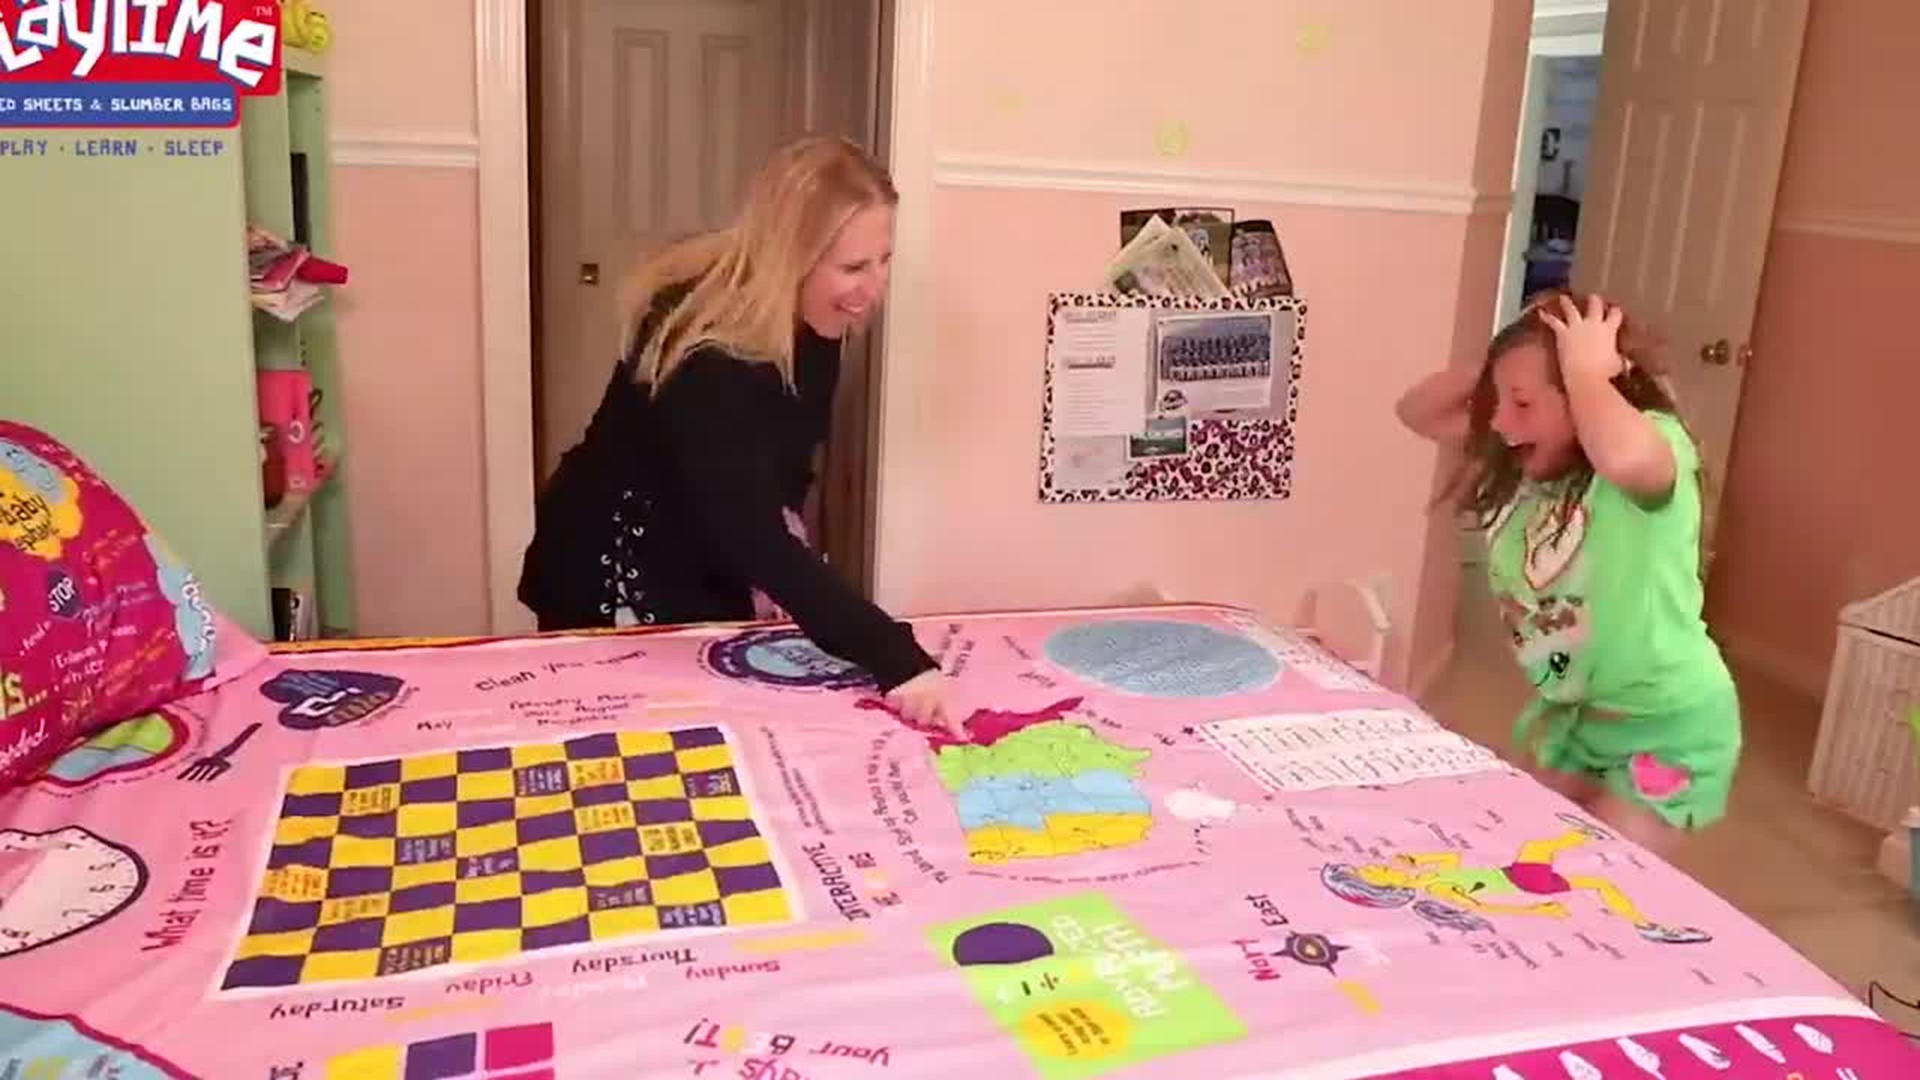 Charlotte man creating fun and engaging bed sheets for children in hospitals